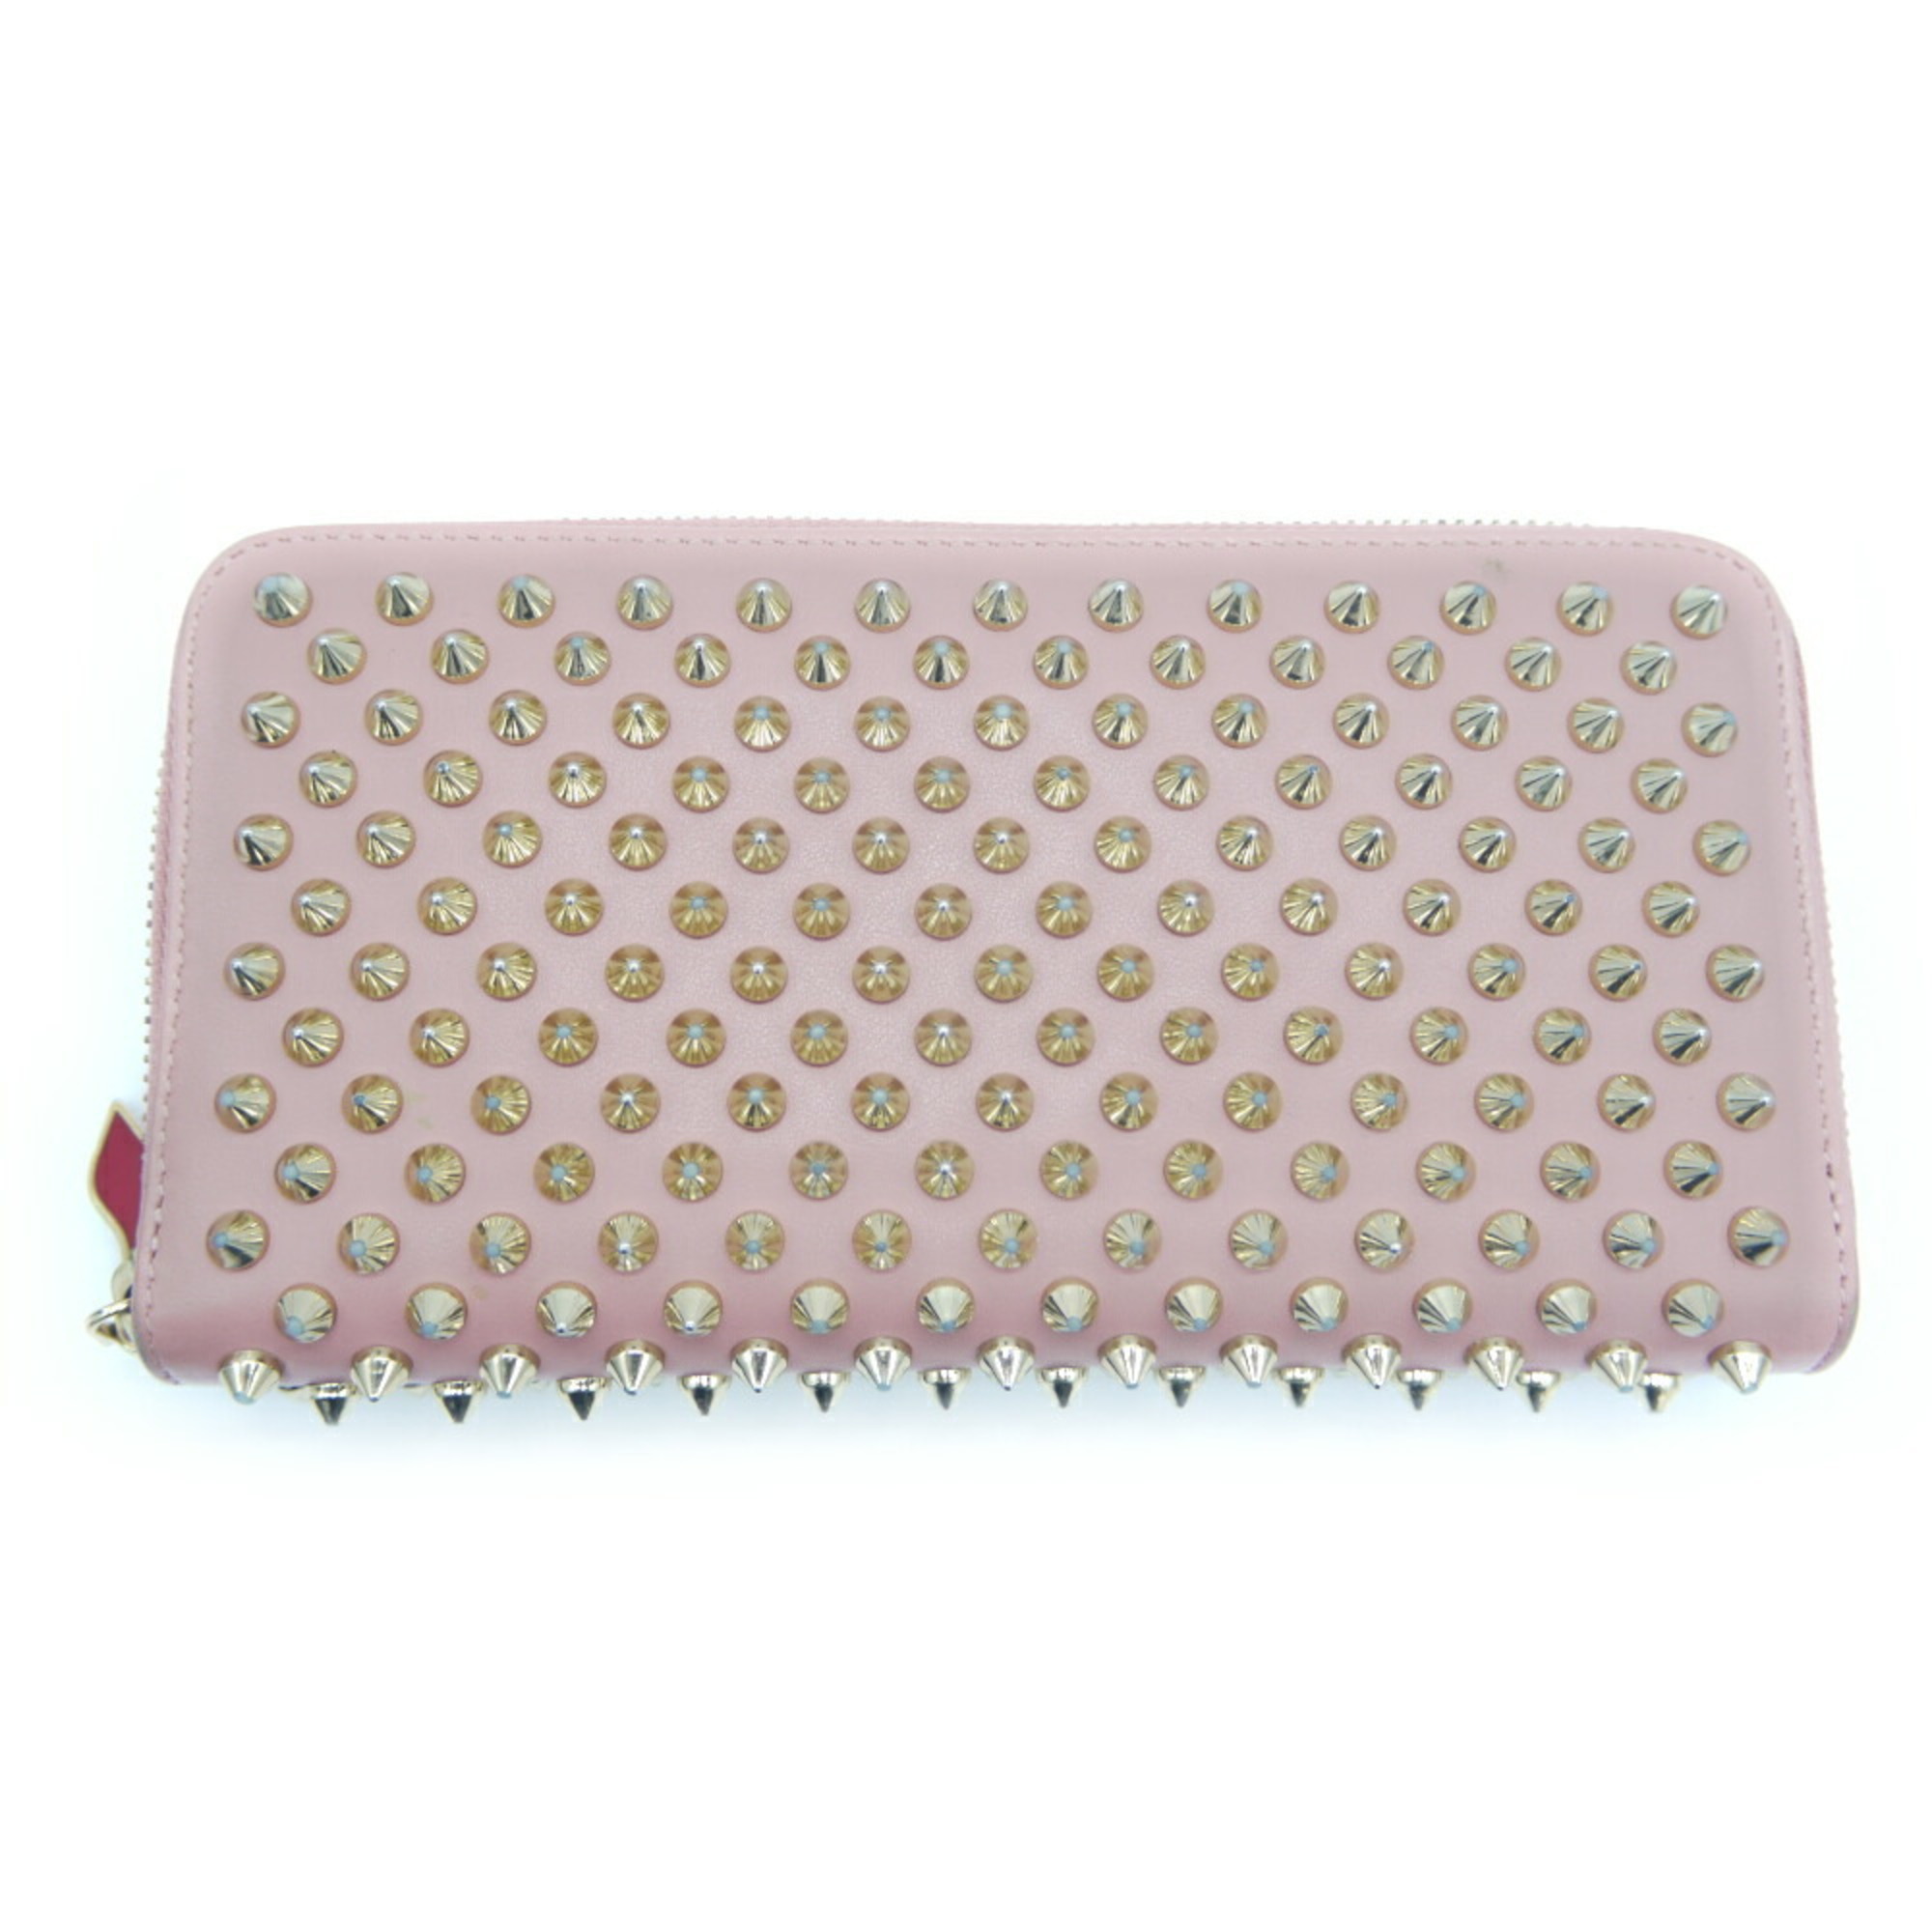 Christian Louboutin Panettone Spike Studs Round Zip Long Wallet Pink 1165065 Y03252